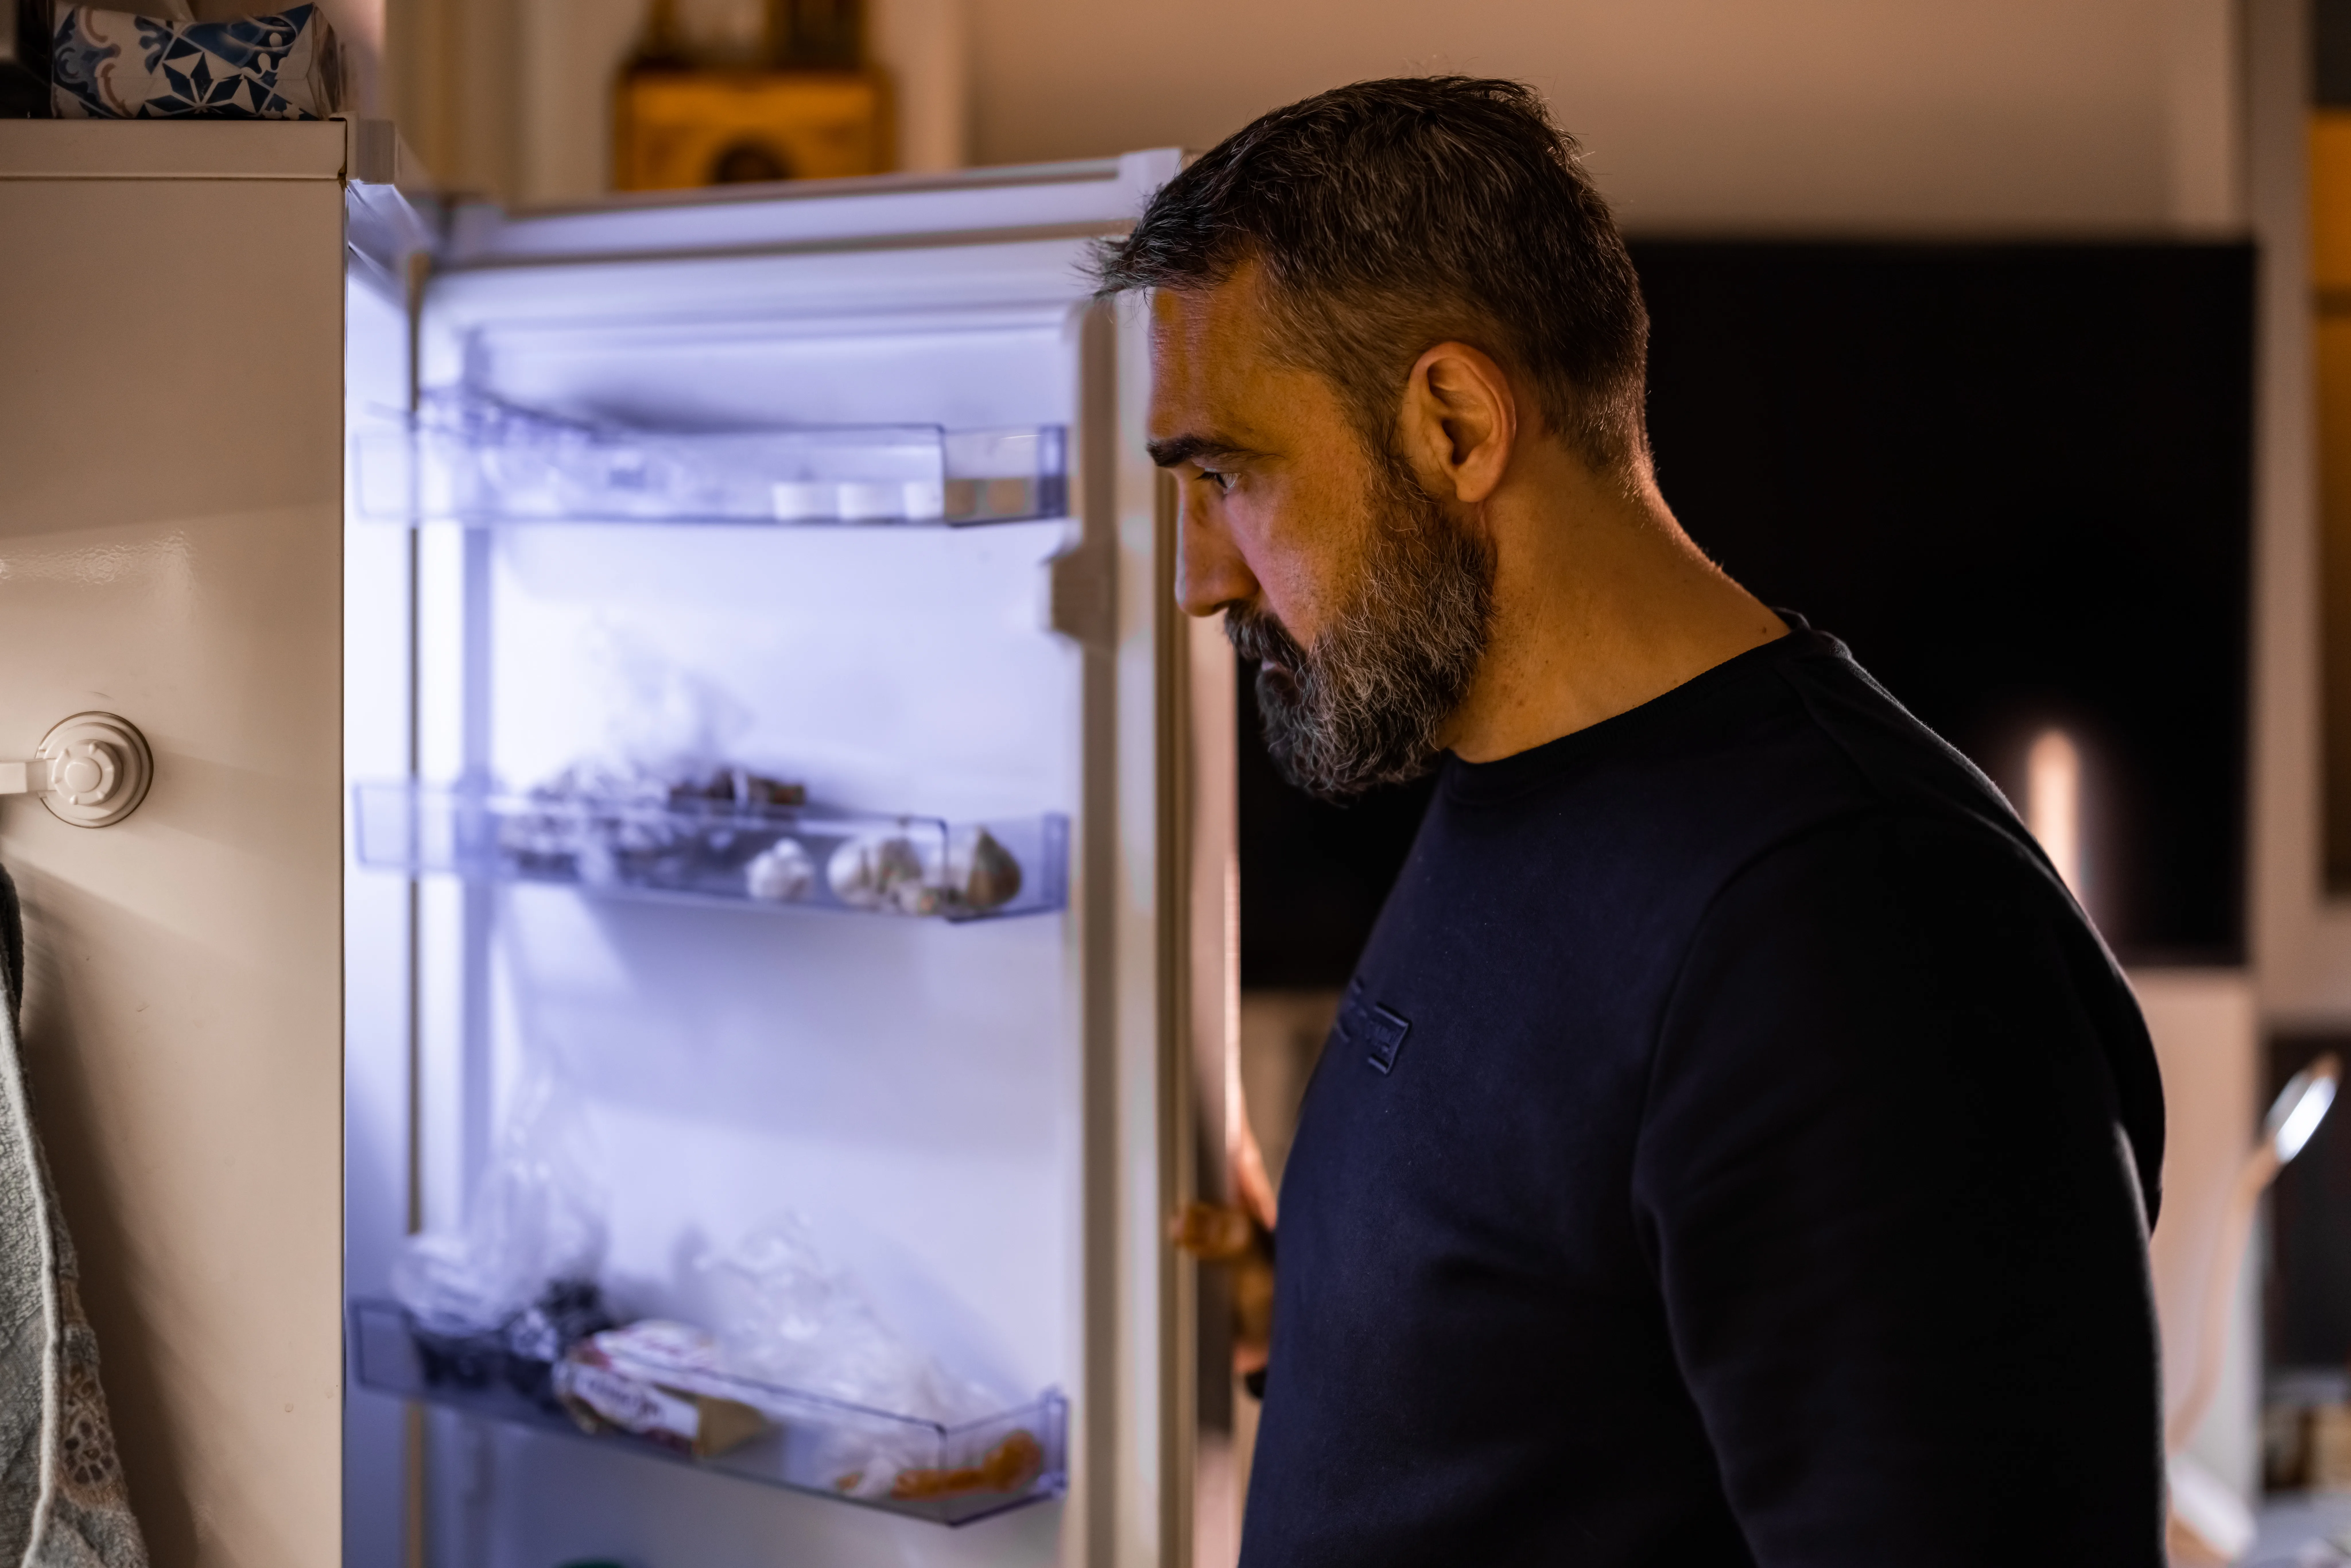 Mature Man choosing food from refrigerator in kitchen